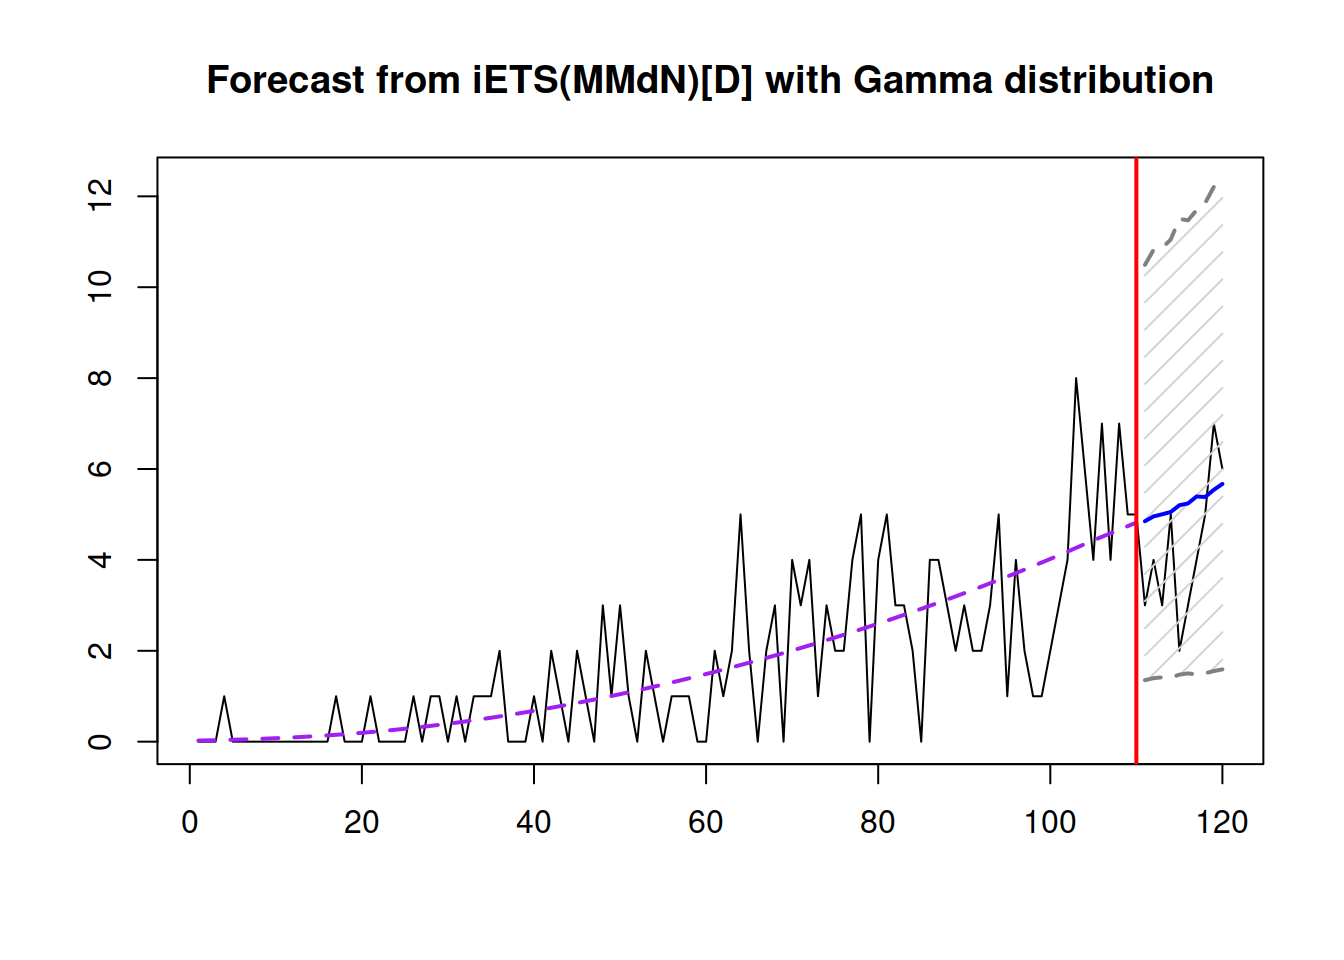 Point forecasts and prediction interval from the iETS(M,Md,N)$_D$ model.